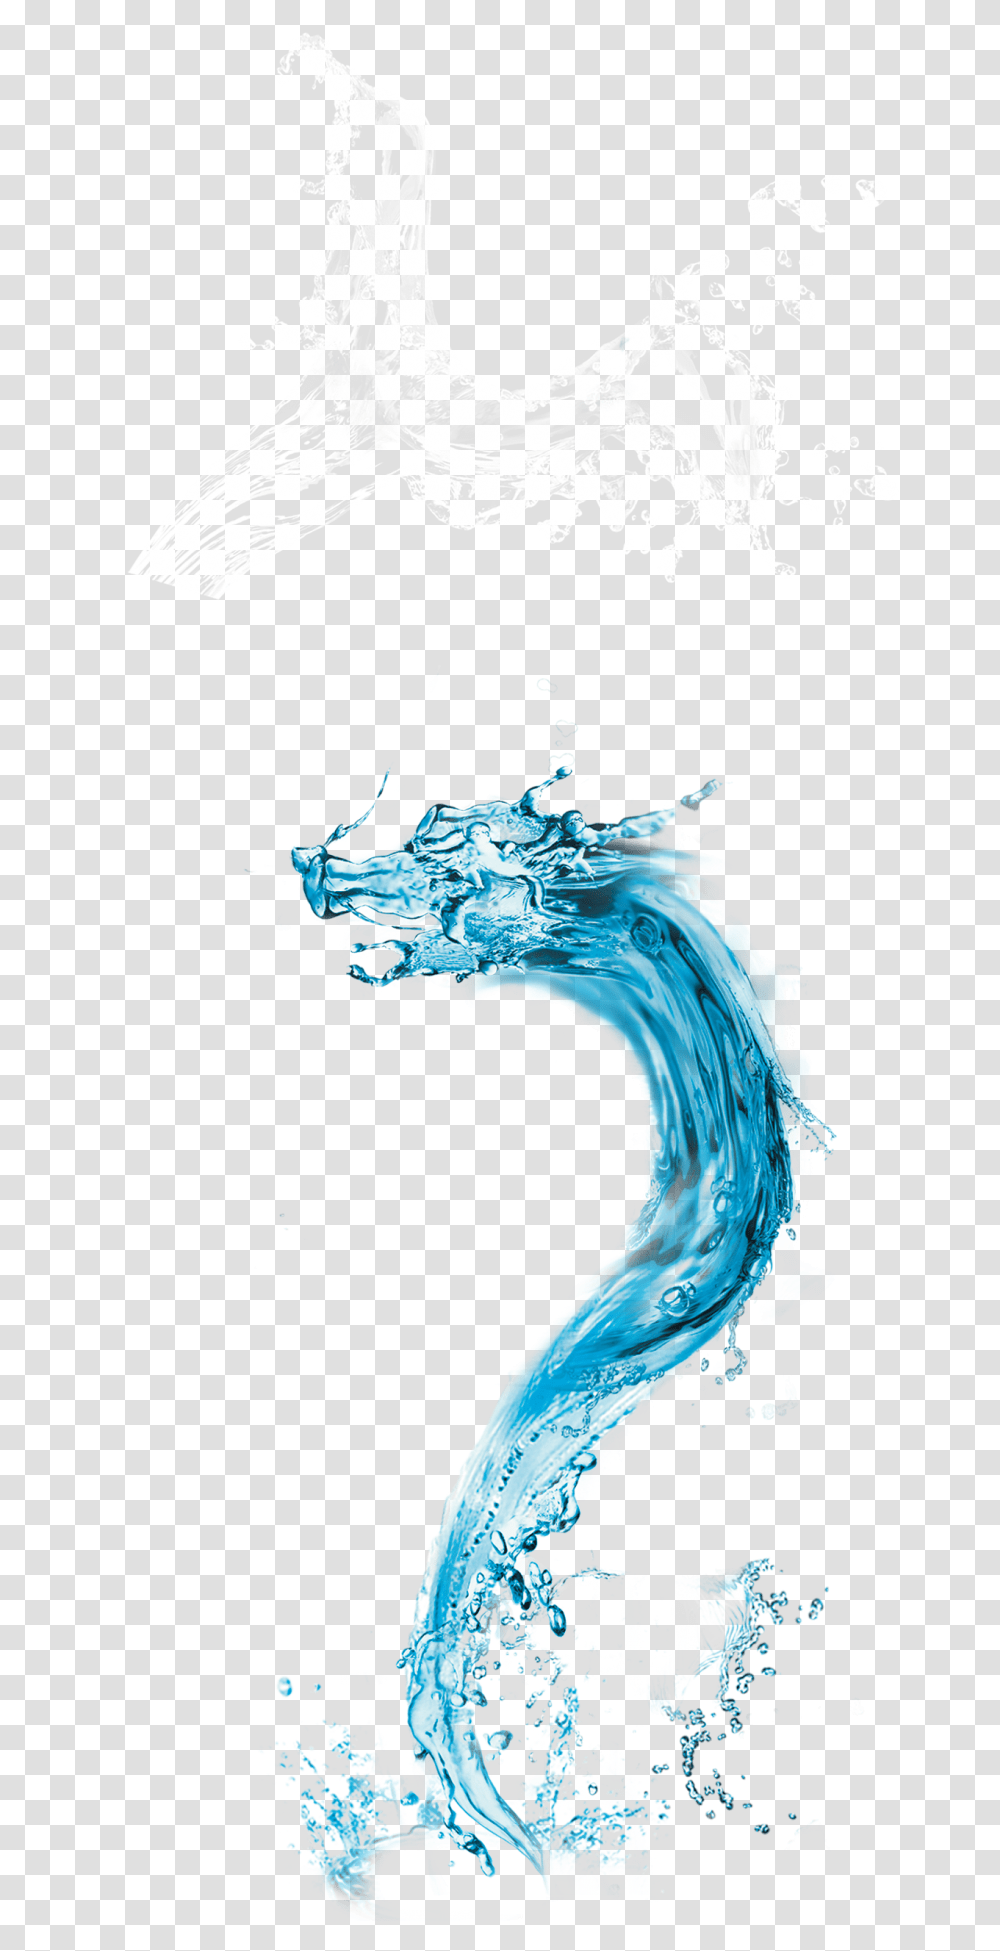 Water Effects Long Free Image Hq Clipart Water Effects, Sea, Outdoors, Nature, Sea Waves Transparent Png